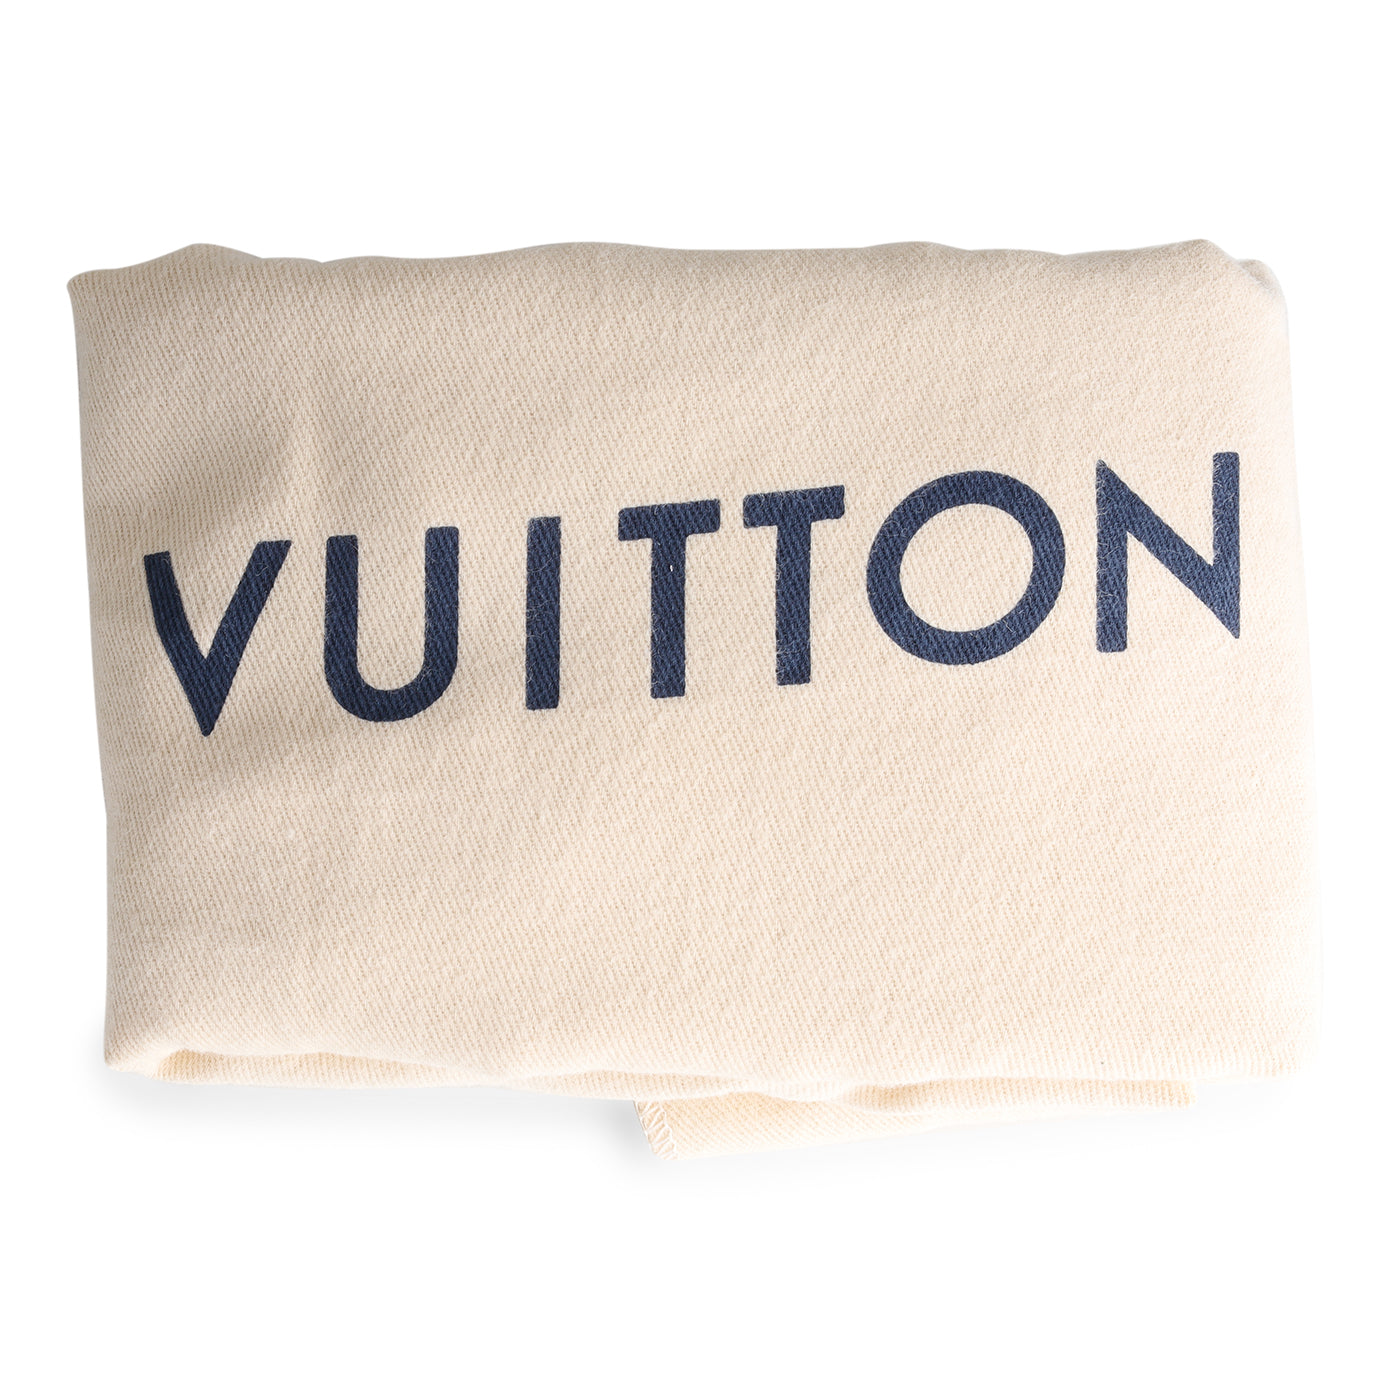 Louis Vuitton Coussin PM Taupe (M59277) Brand New